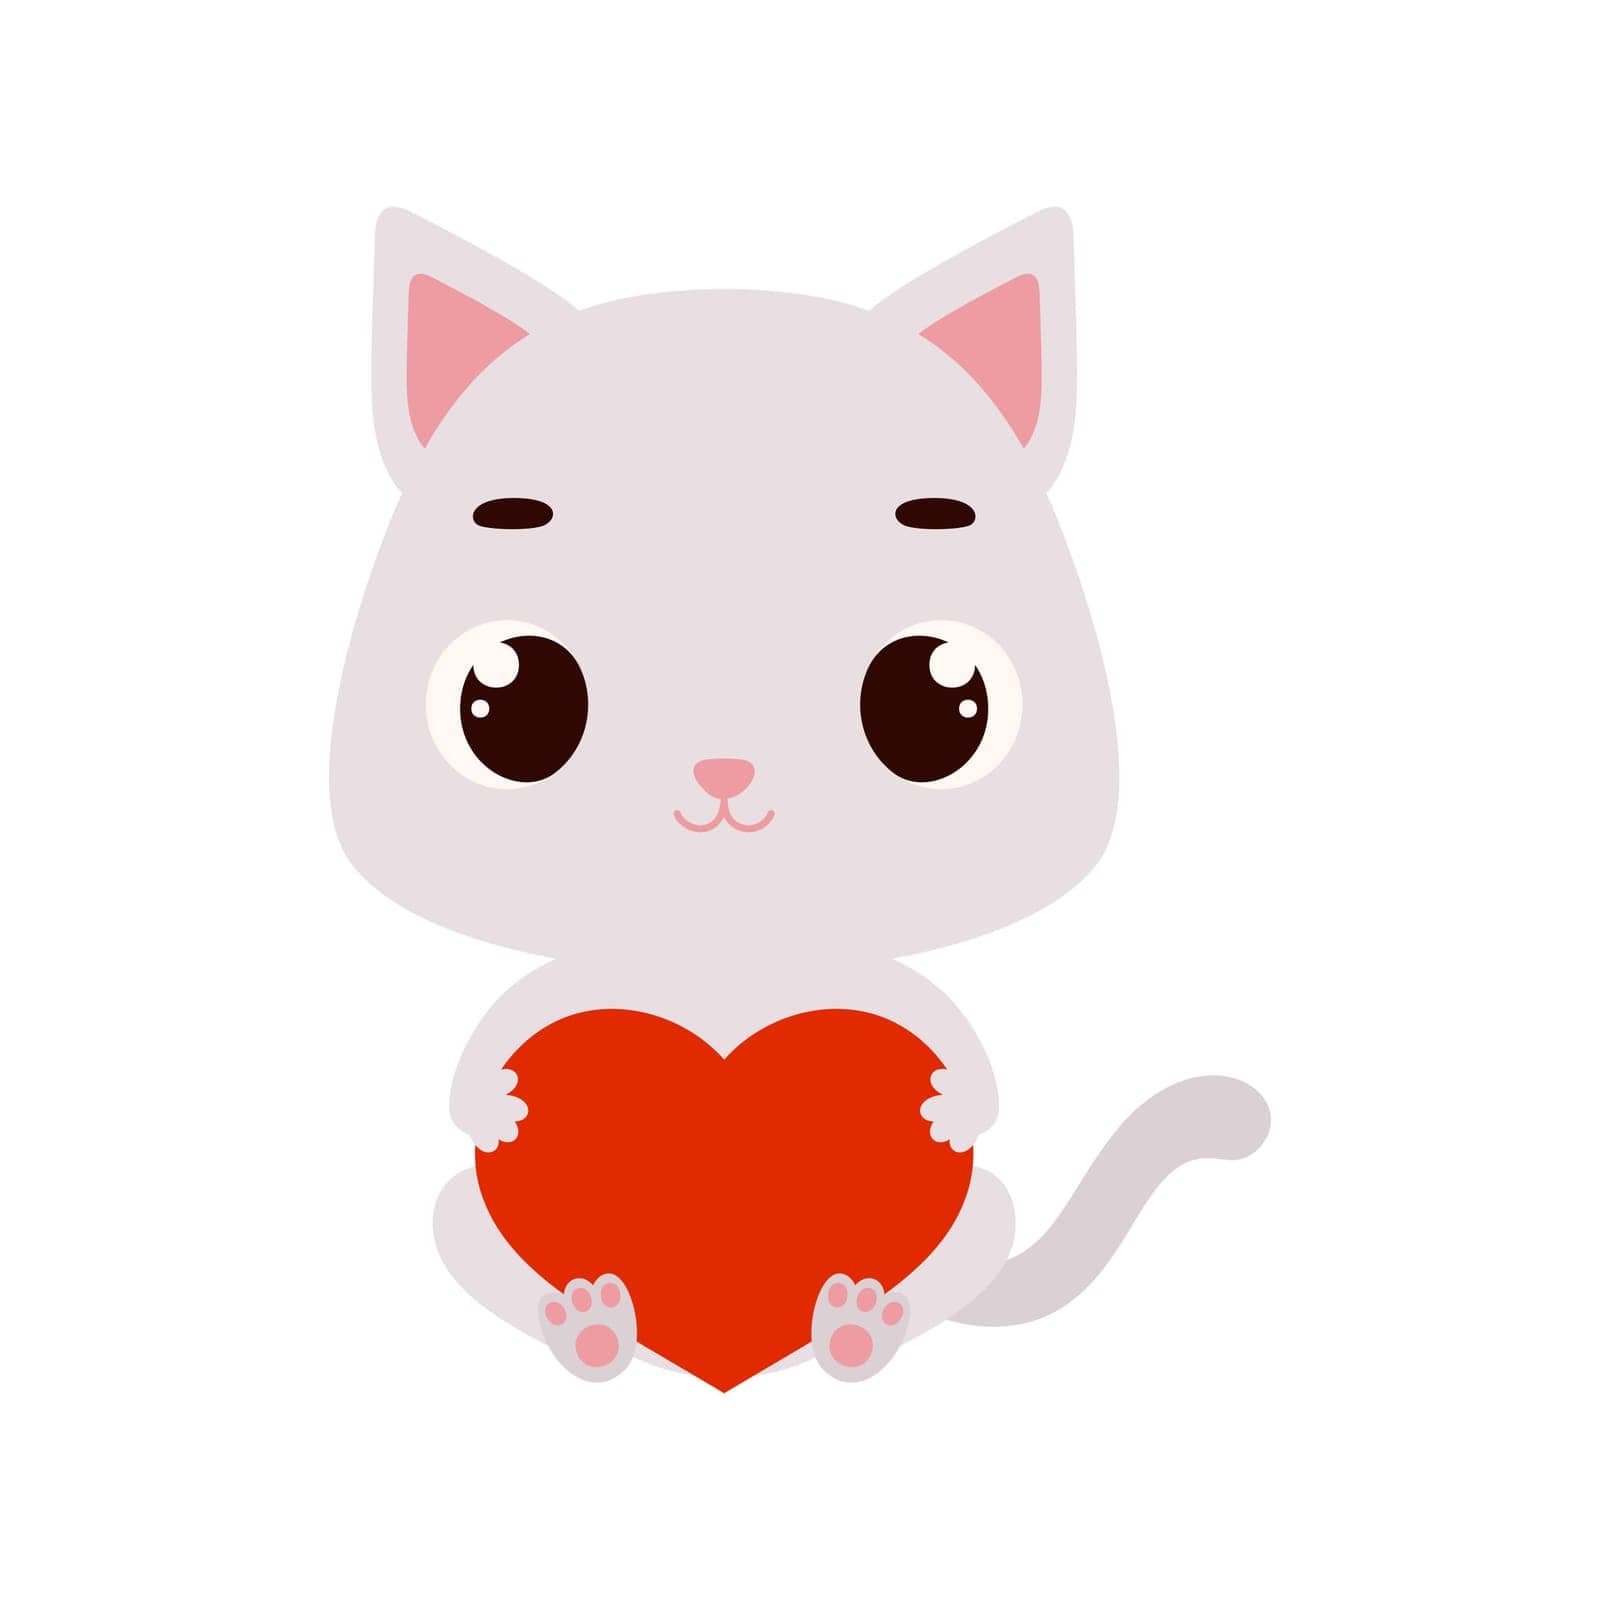 Cute little sitting cat holds heart. Cartoon animal character for kids cards, baby shower, invitation, poster, t-shirt composition, house interior. Vector stock illustration